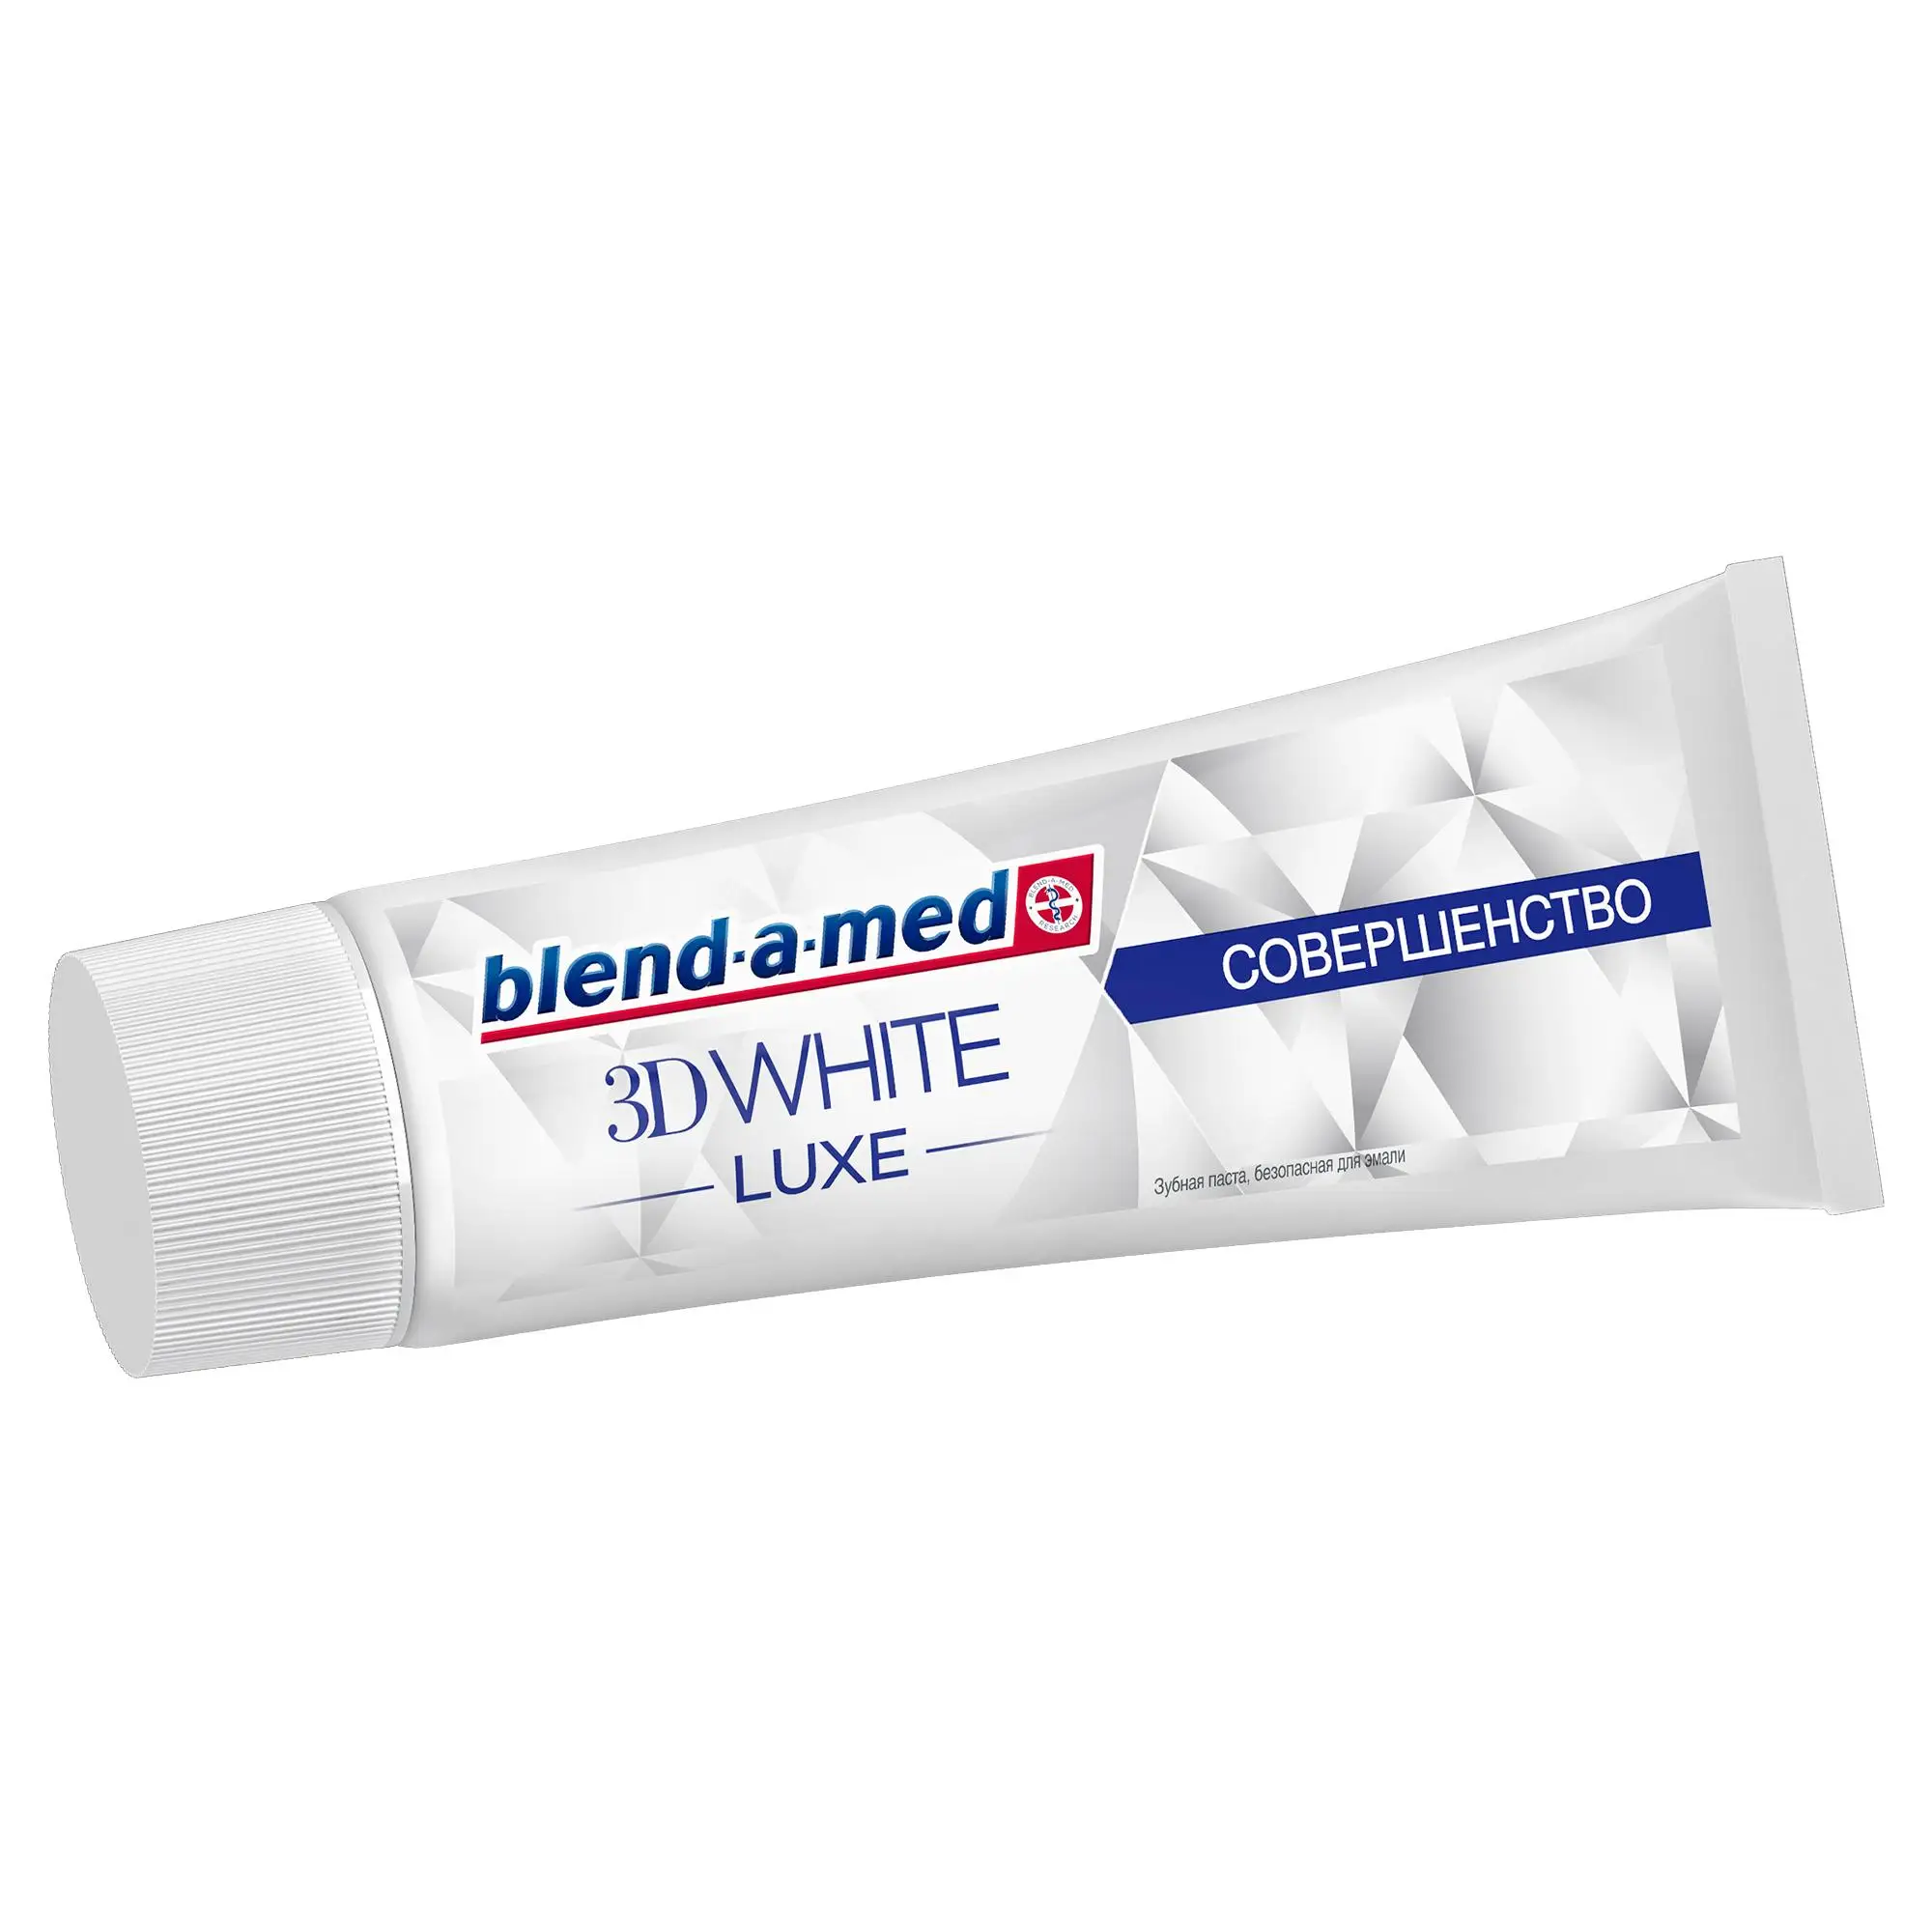 Toothpaste Blend-a-med 3D White Luxe Perfection, 75 ml,toothpaste, paste, fluoro, enamel, oral, b, blend, a, med, blend-a-med, ipana, az, whitening, therapeutic, 3d, 50 ml, 75 ml, 100 ml, white teeth, carious